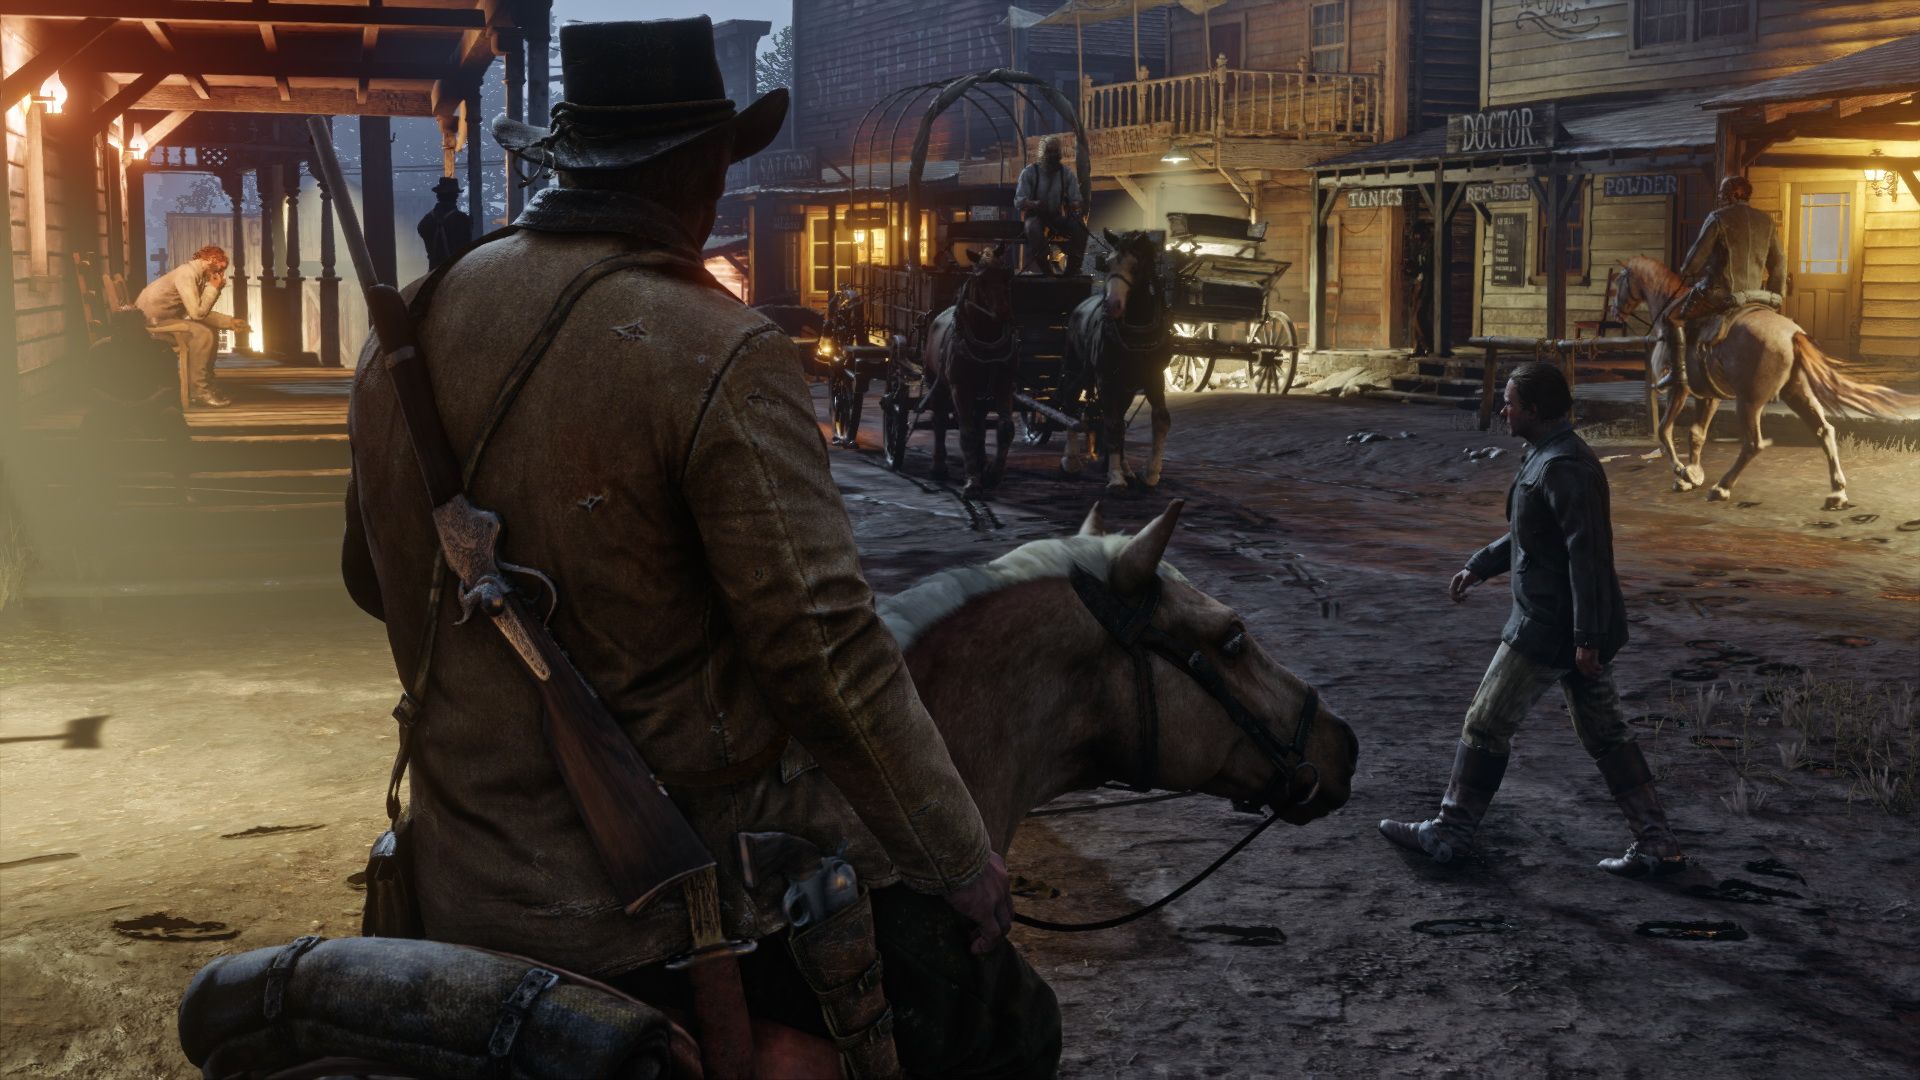 Today, we are going to be covering the Red Dead Redemption 3 release date and rumors as the next installment to the franchise highly anticipated by fans.